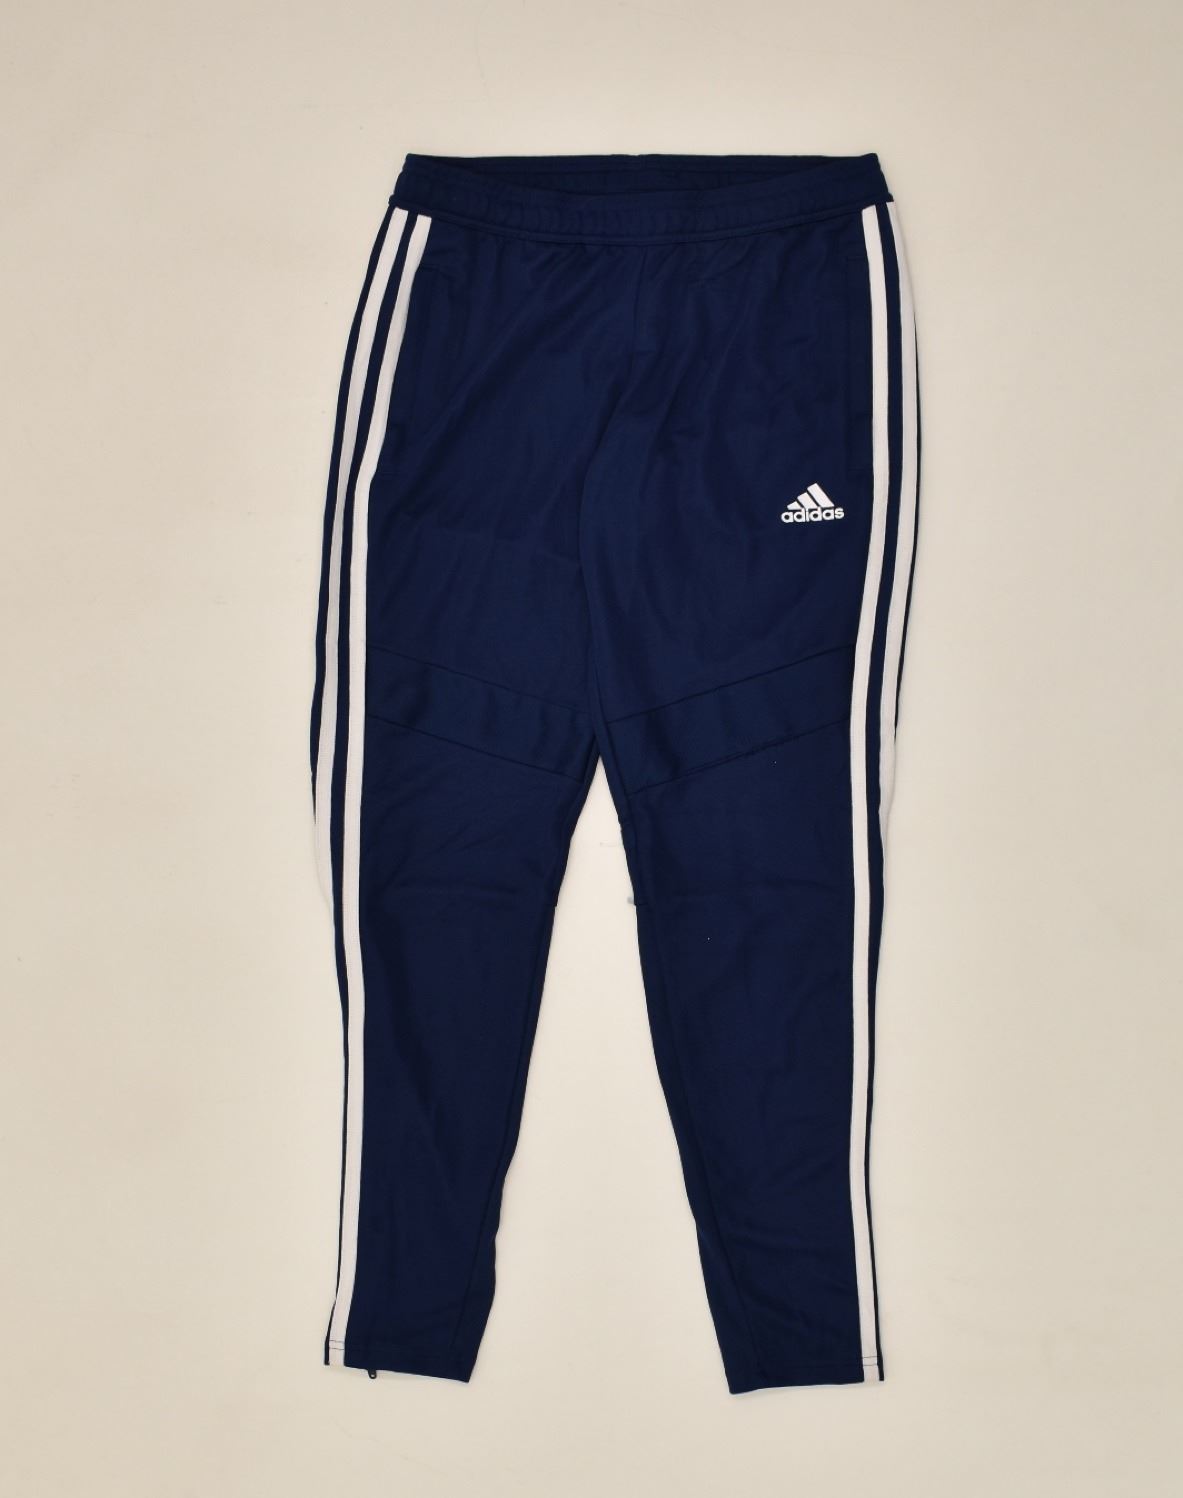 ADIDAS Womens Tracksuit Trousers UK 4-6 XS Navy Blue Polyester